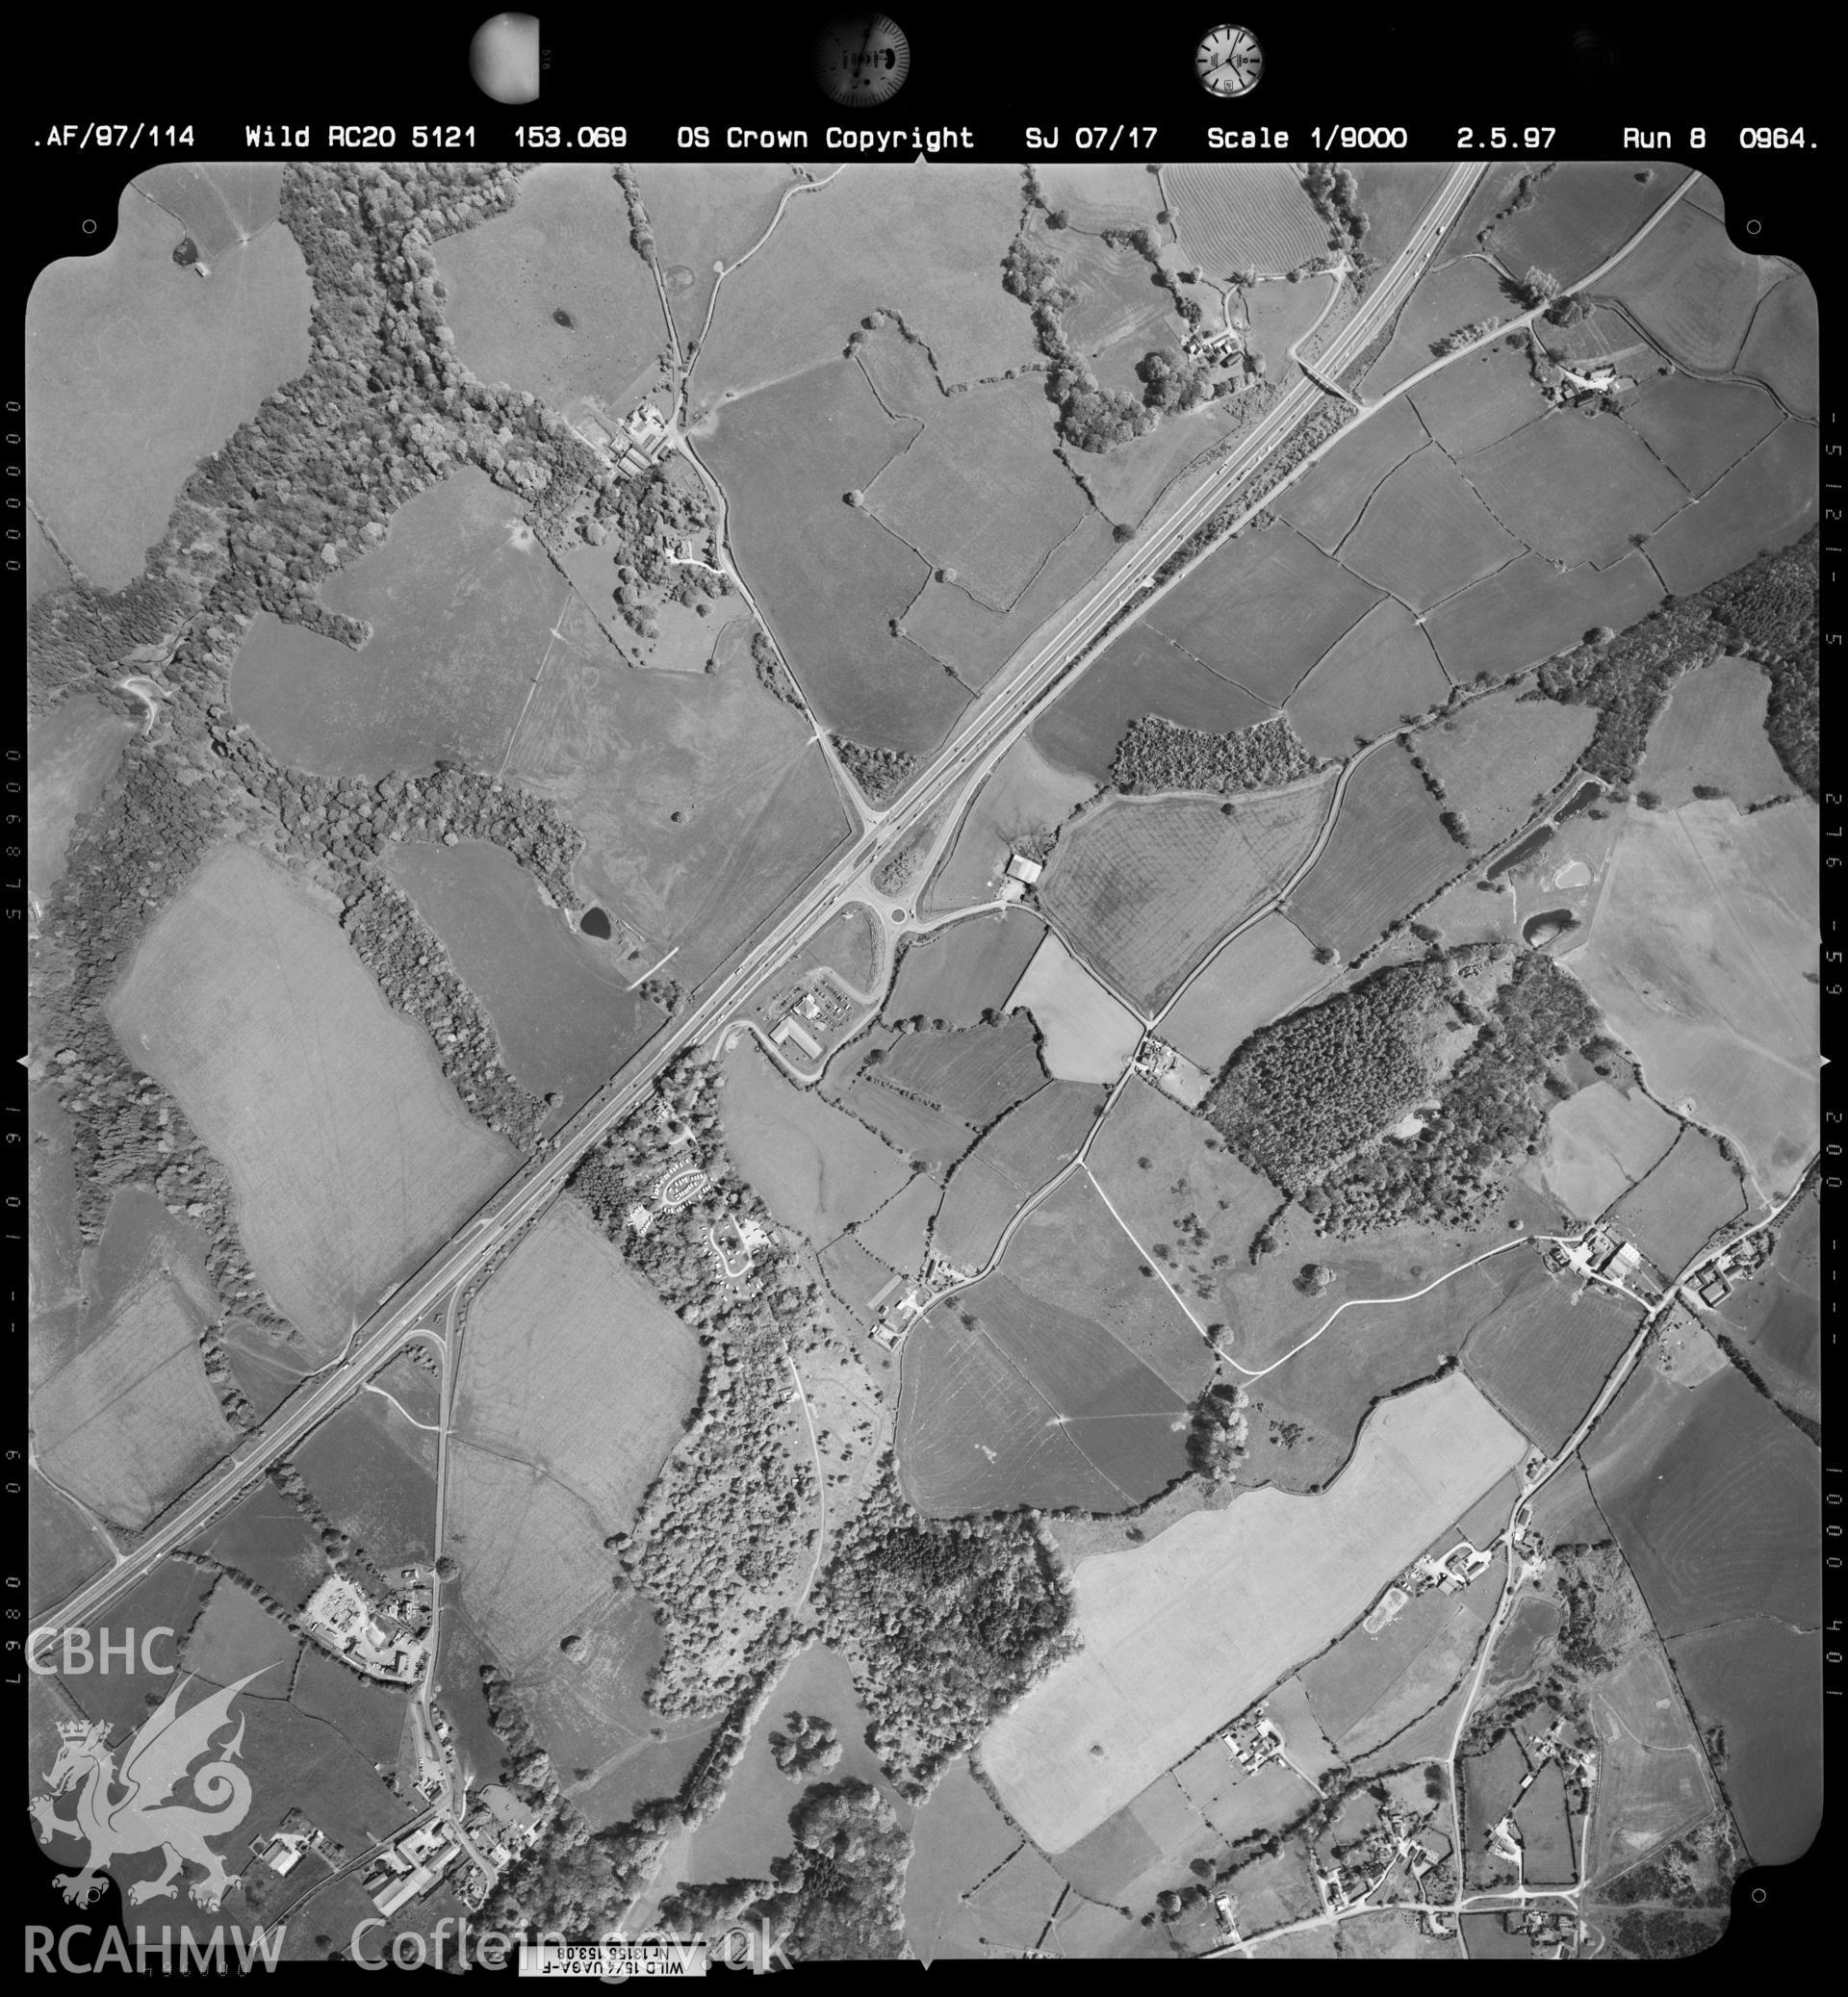 Digitized copy of an aerial photograph showing the Halkynt area, taken by Ordnance Survey,  1997.